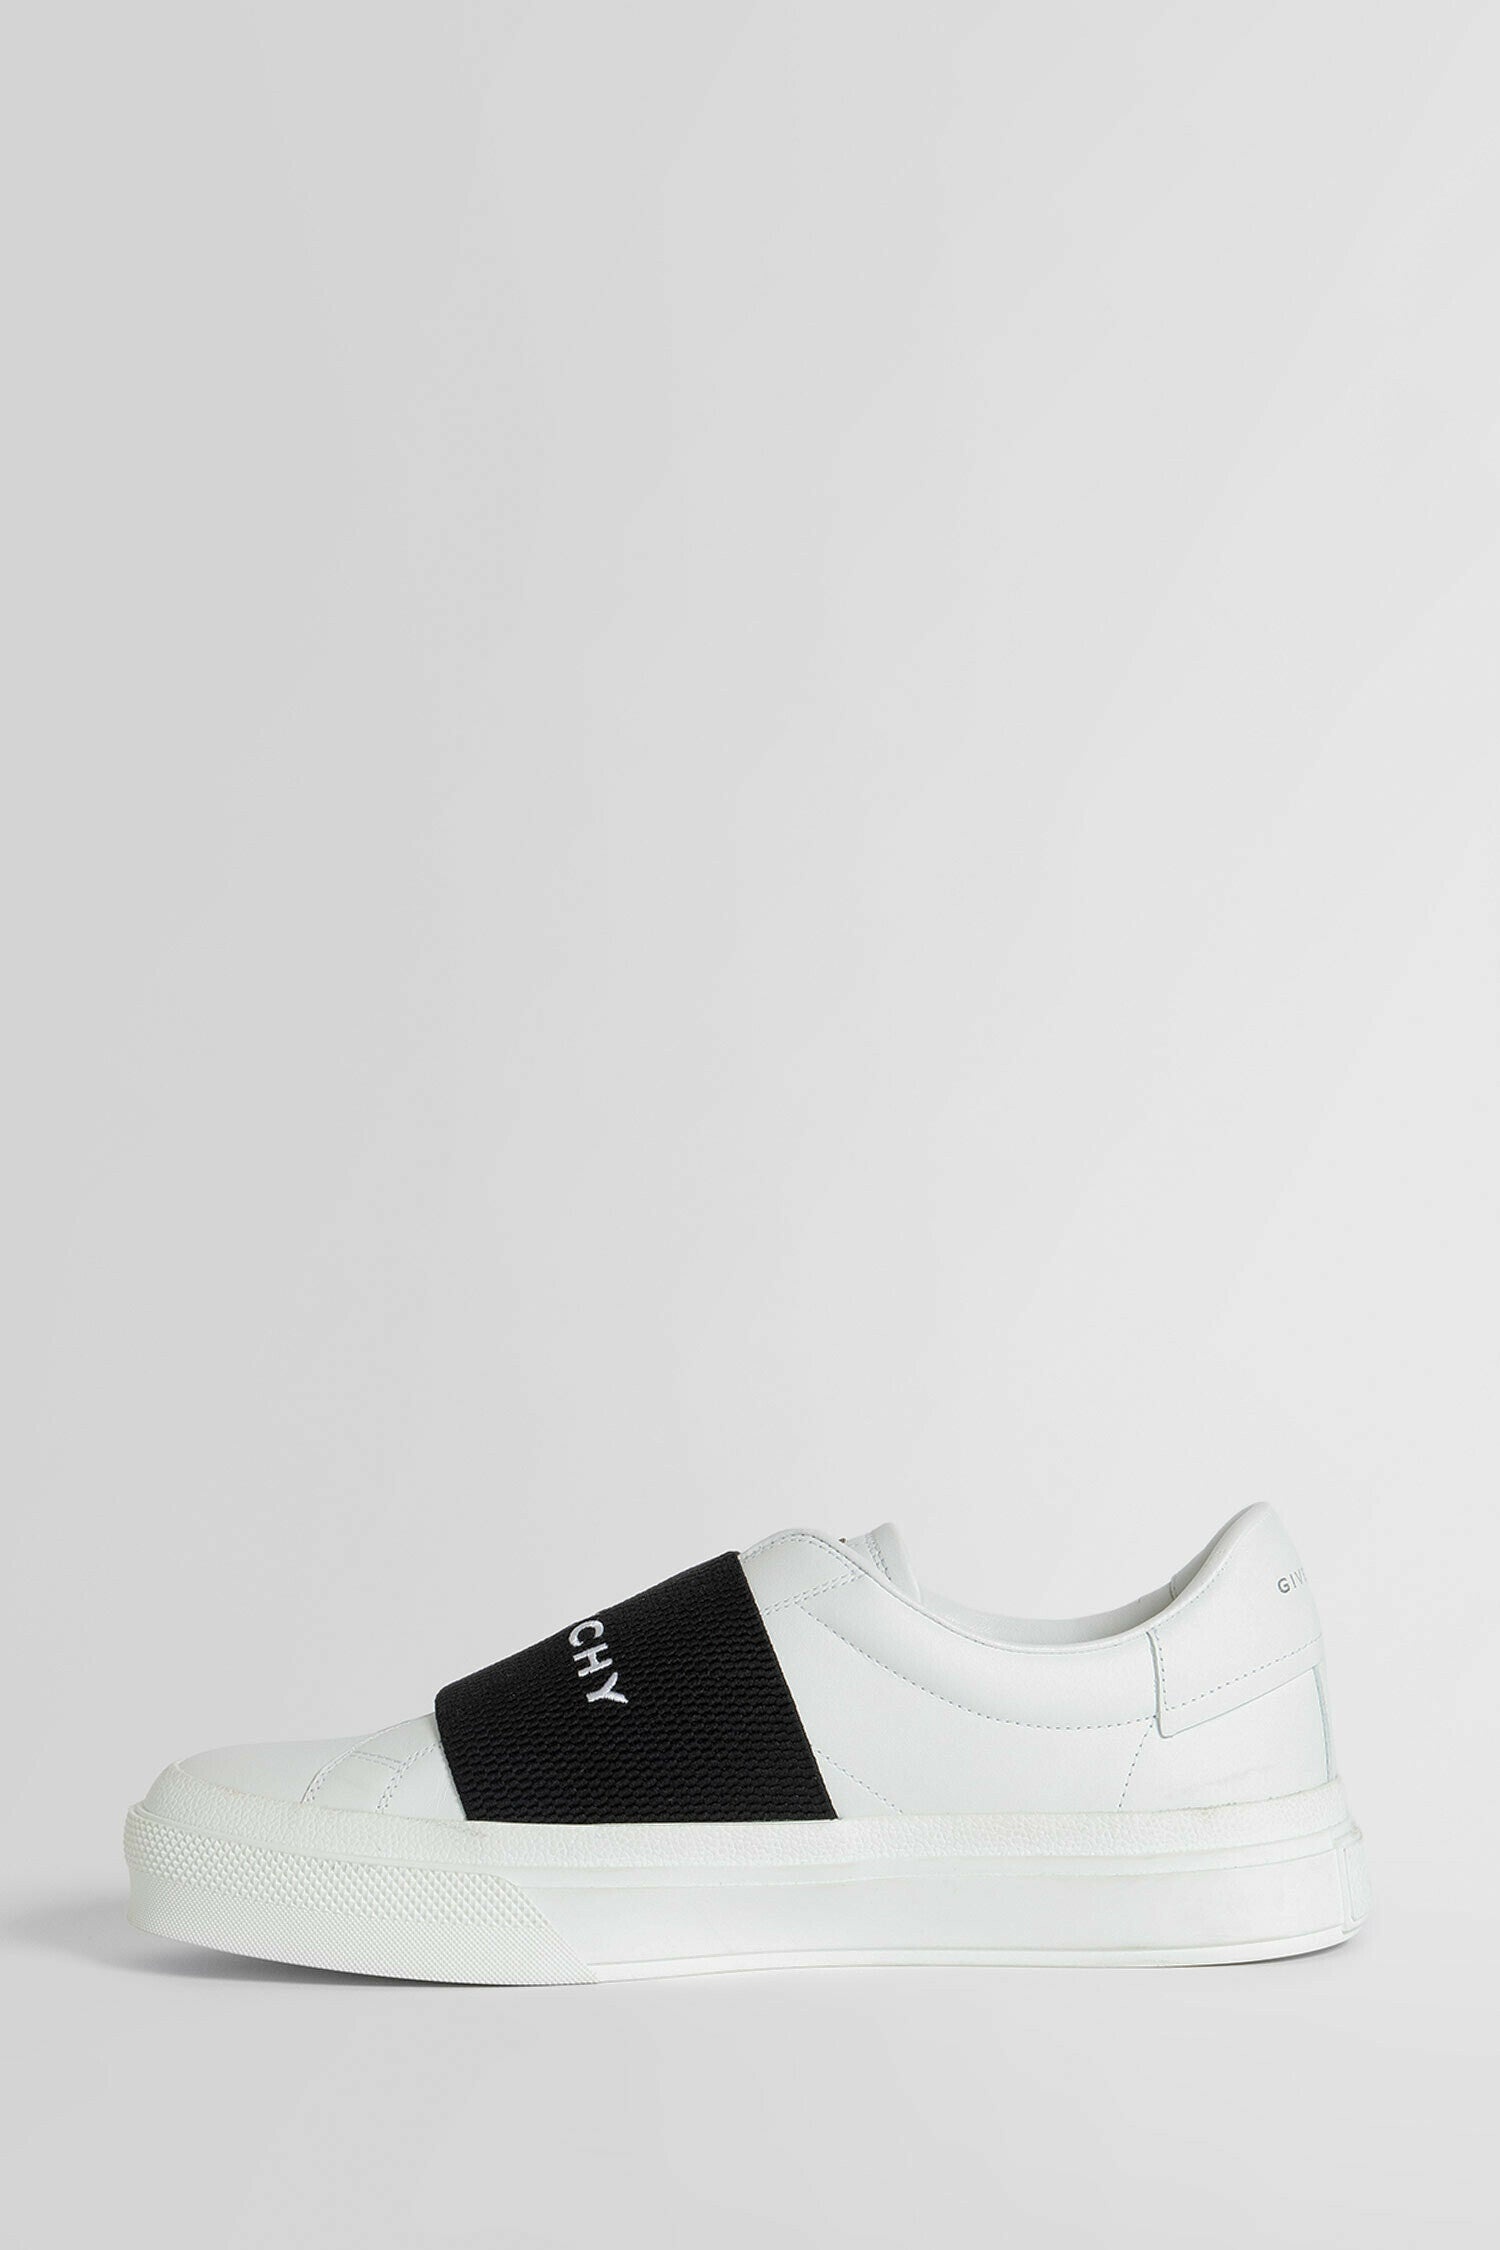 GIVENCHY MAN WHITE SNEAKERS - 4